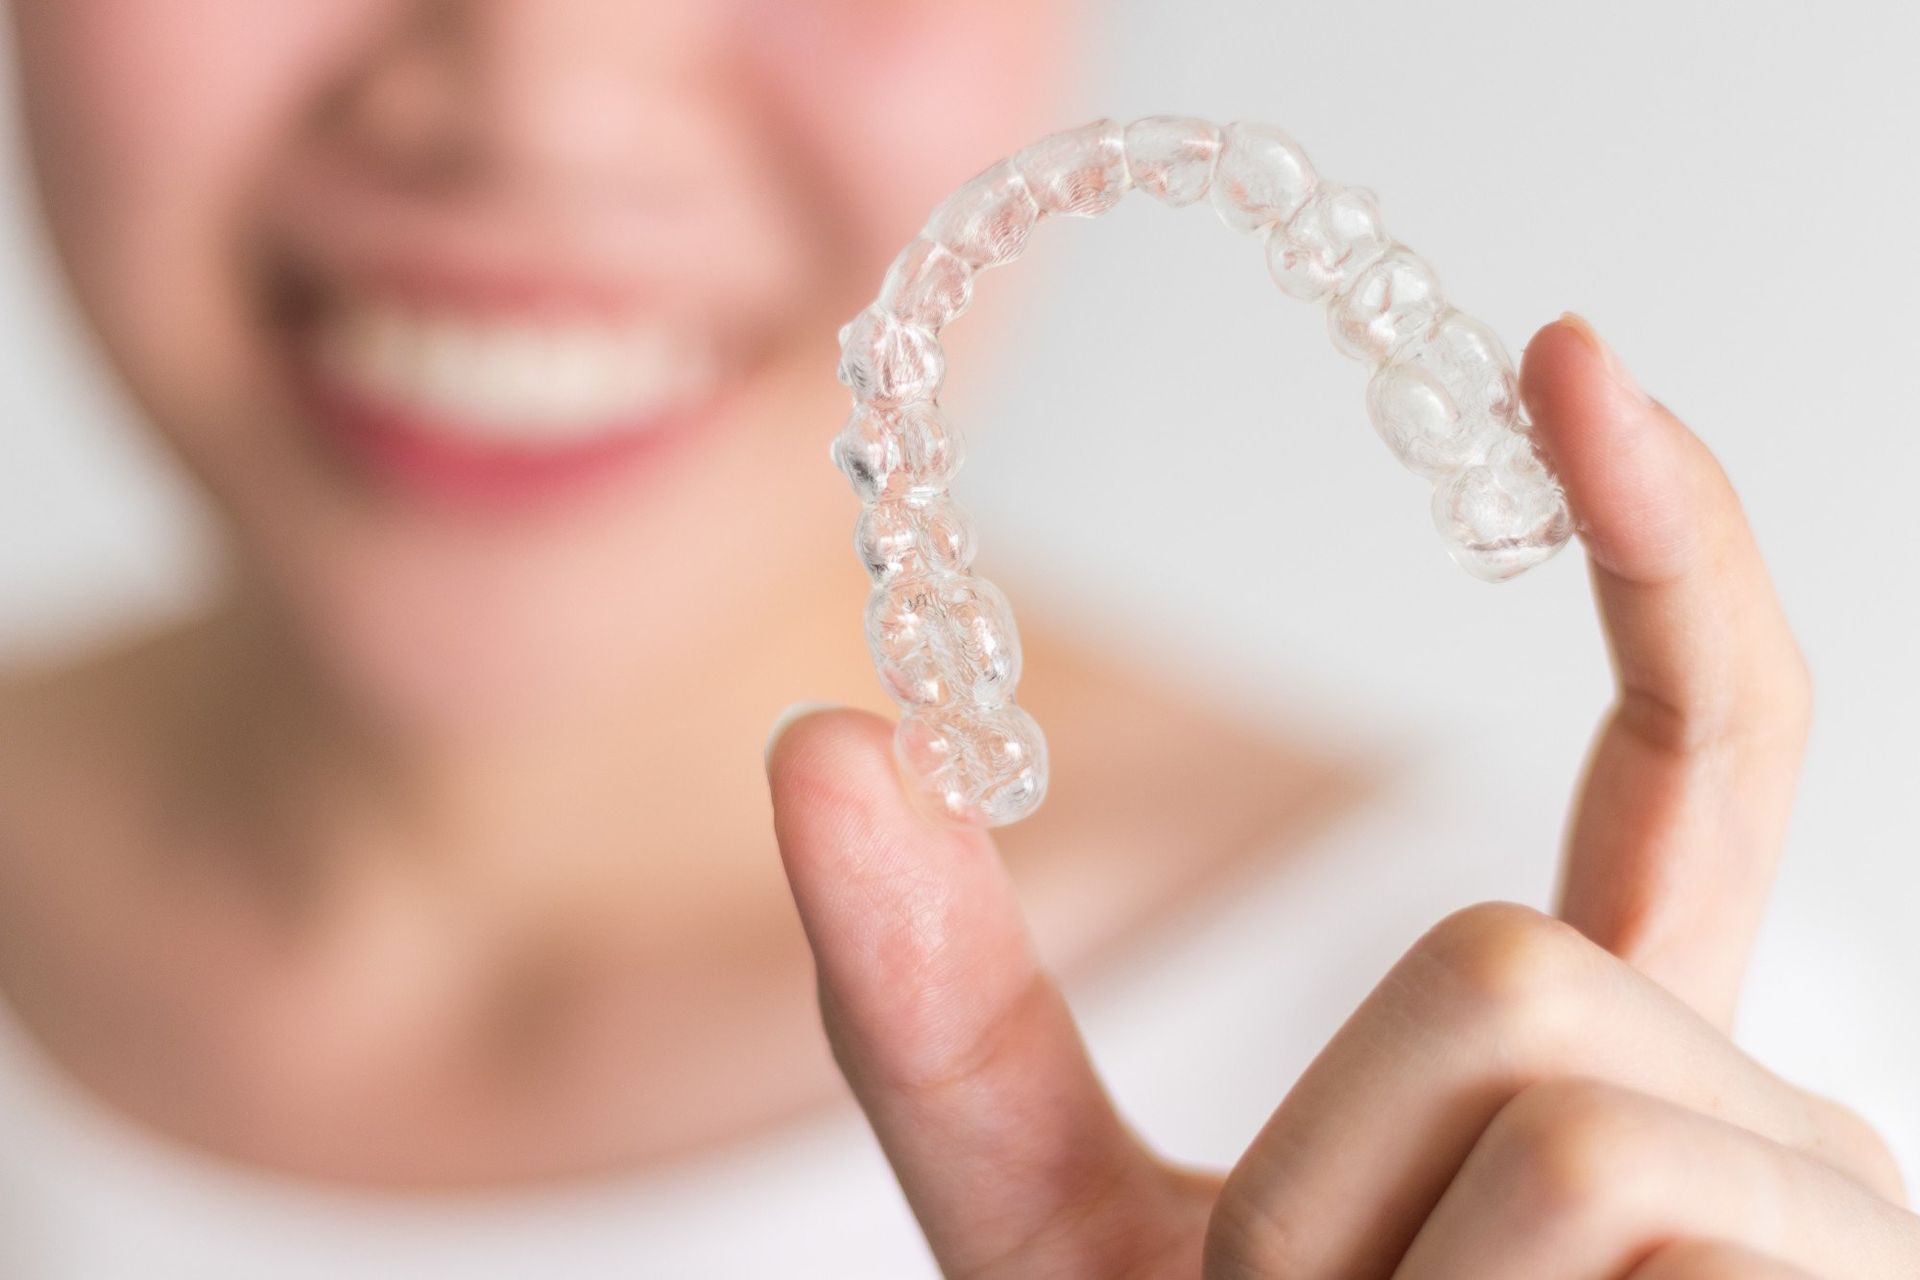 how to clean invisalign,invisalign clear aligners, clean invisalign, clear aligners, cleaning invisa